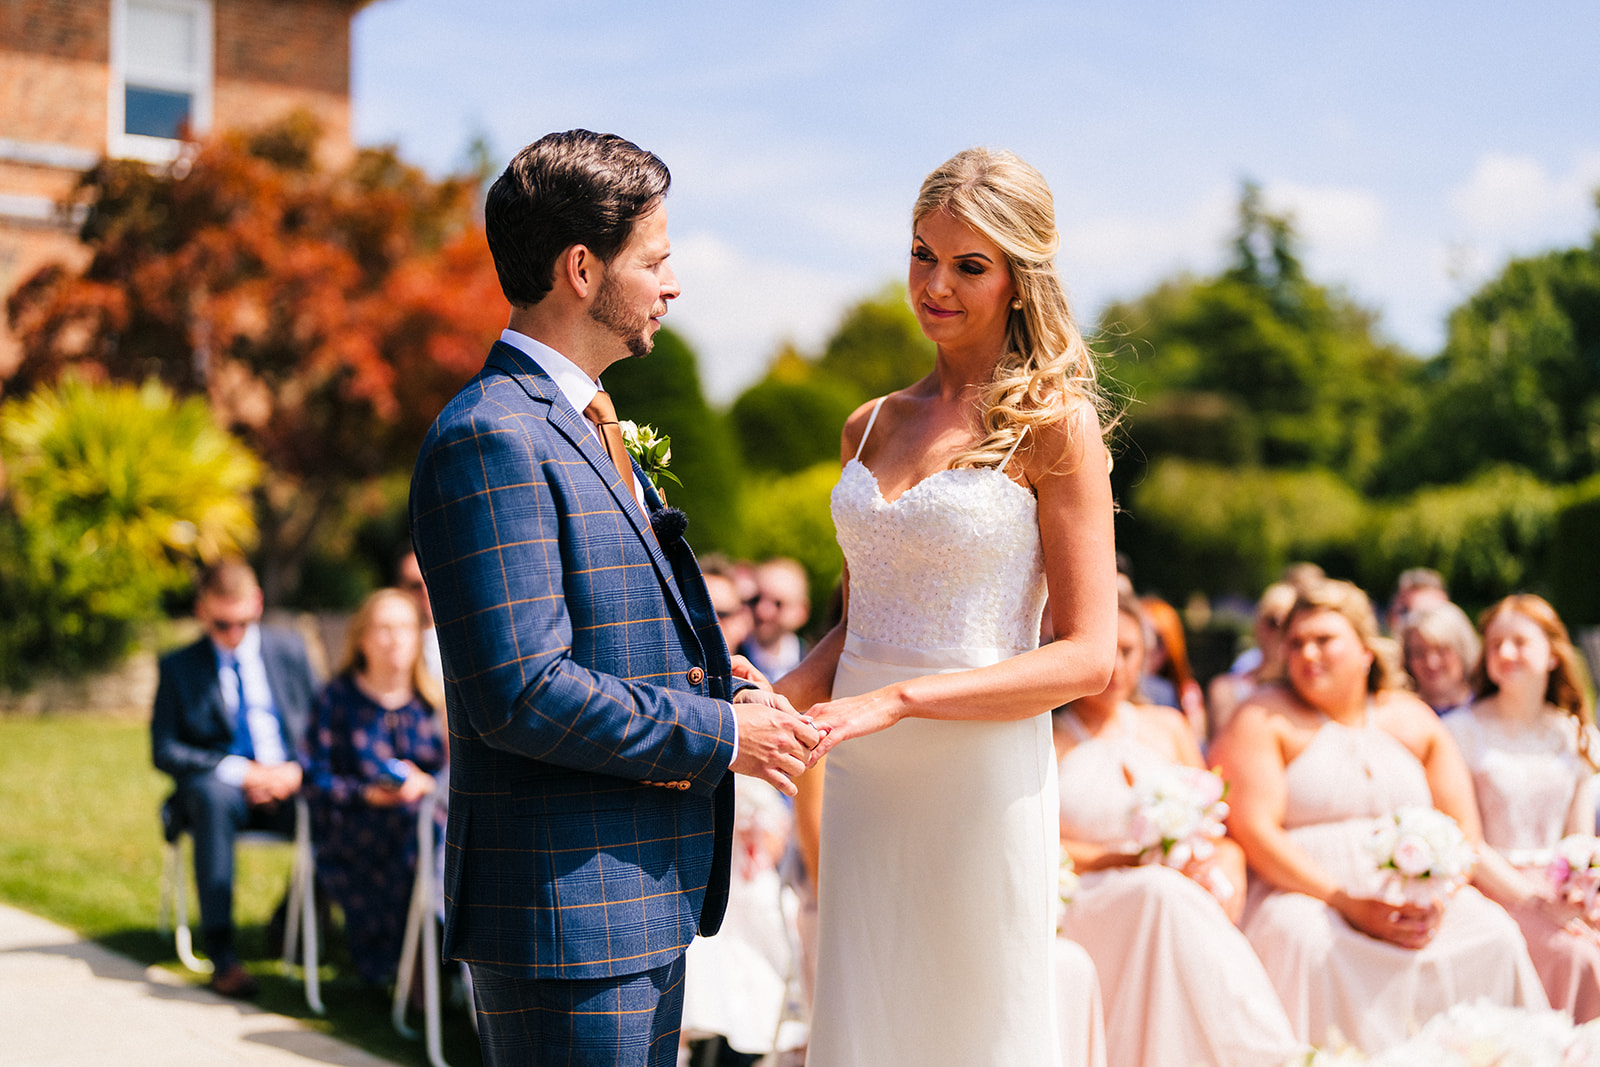  the bride and groom, exchanging wedding rings during an outdoor wedding ceremony